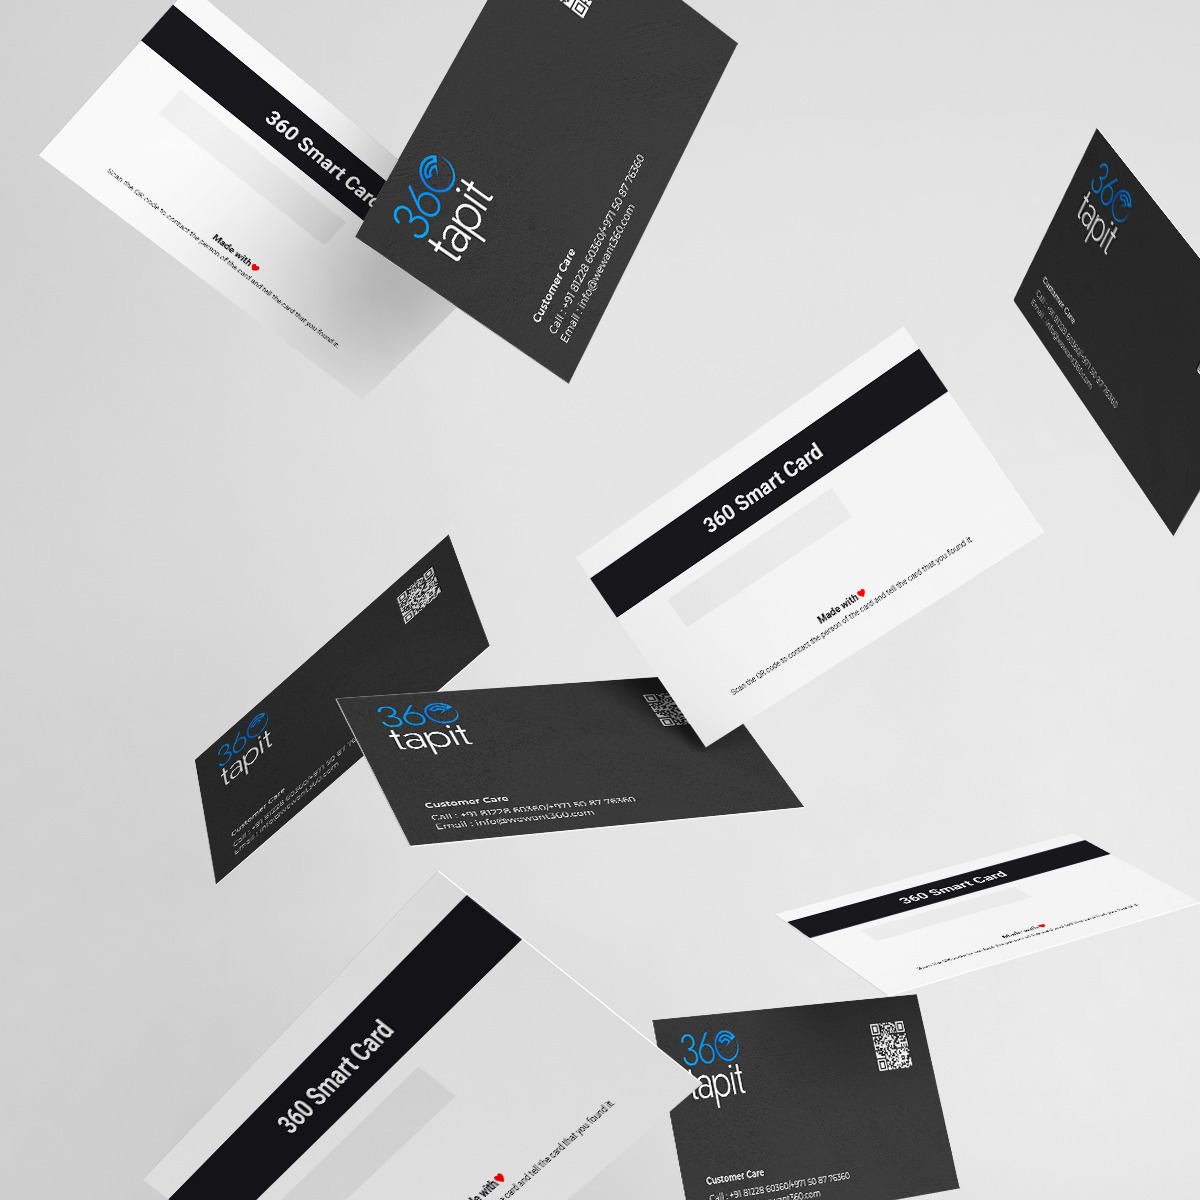 What is 360Tapit Business Card?